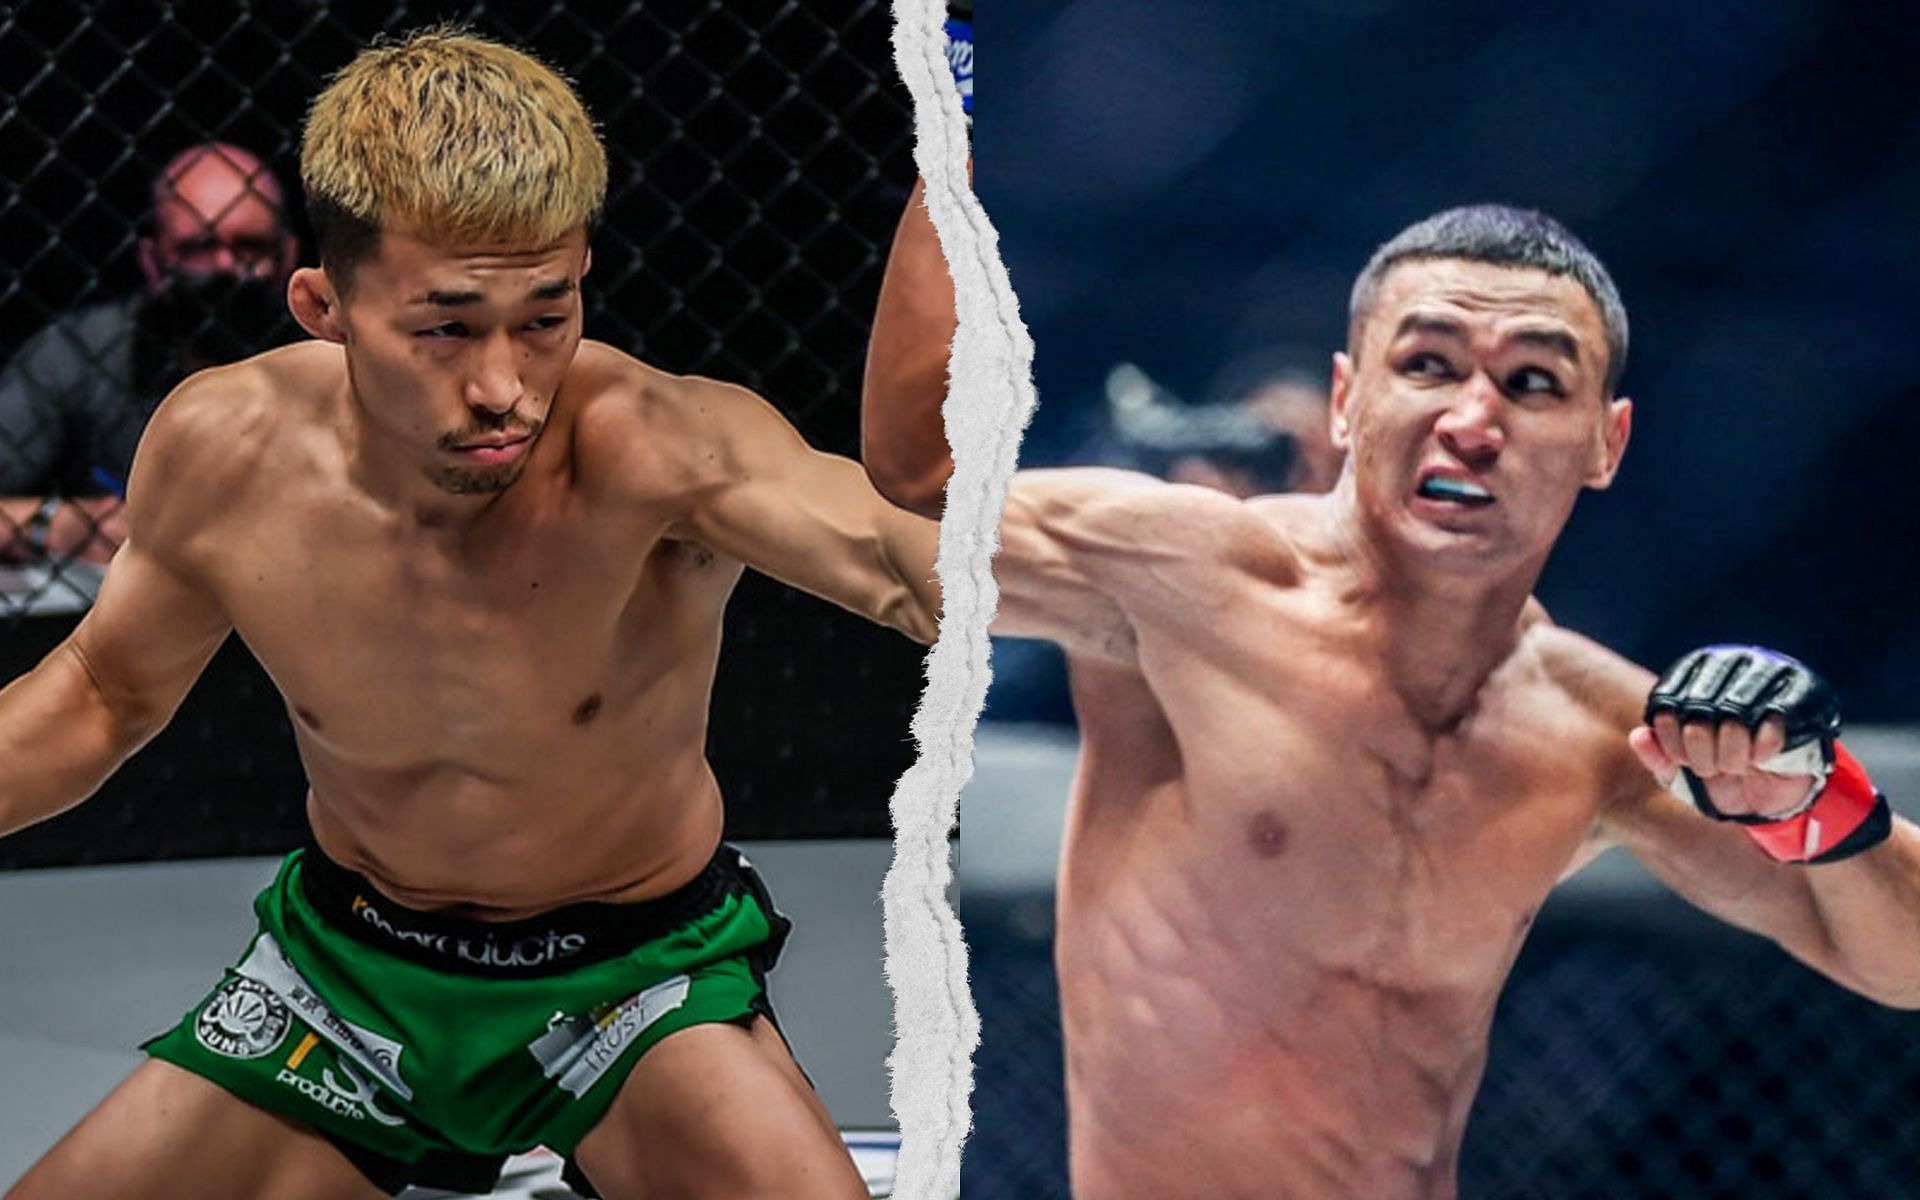 Kairat Akhmetov (R) is gearing up for a war against Tatsumitsu Wada (L) at ONE 158. | [Photos: ONE Championship]